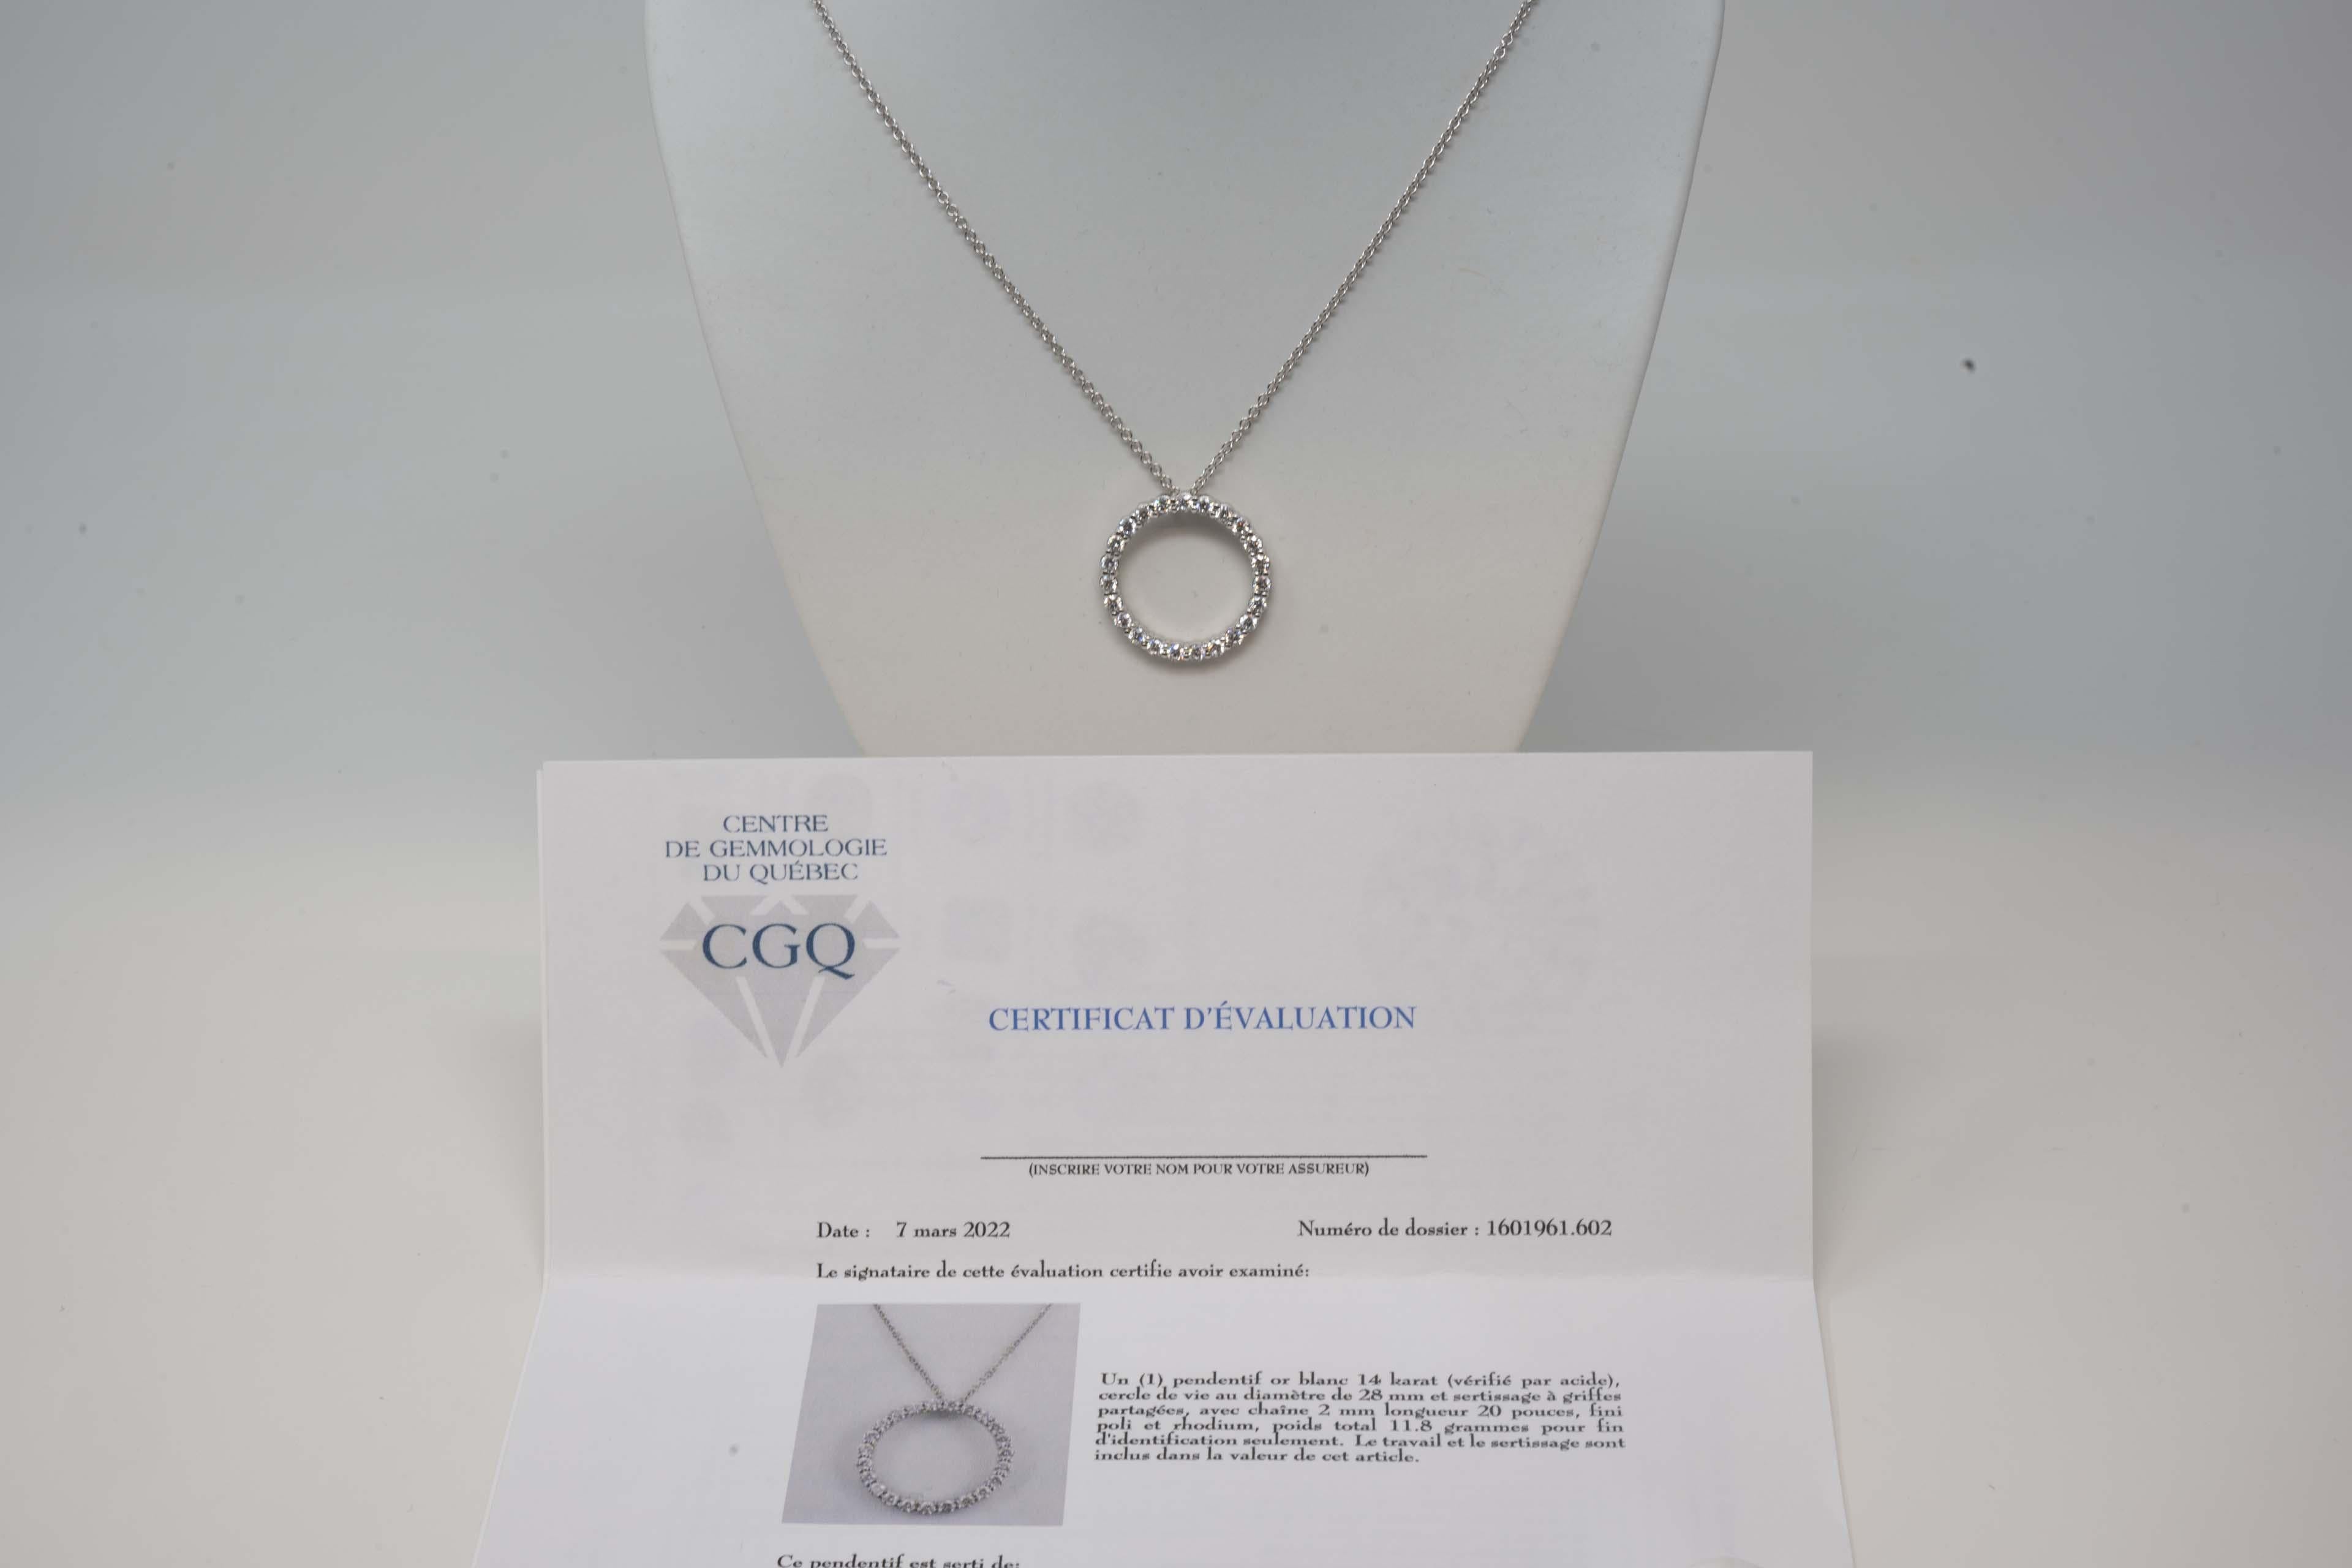 One 14k white gold pendant (acid tested) circle of life shaped with a diameter of 28mm and a chain measuring 2mm x 20 inches. Polished rhodium finish. Weighs 11.8 grams. The pendant is set with twenty-three (23) round brilliant cut diamonds average